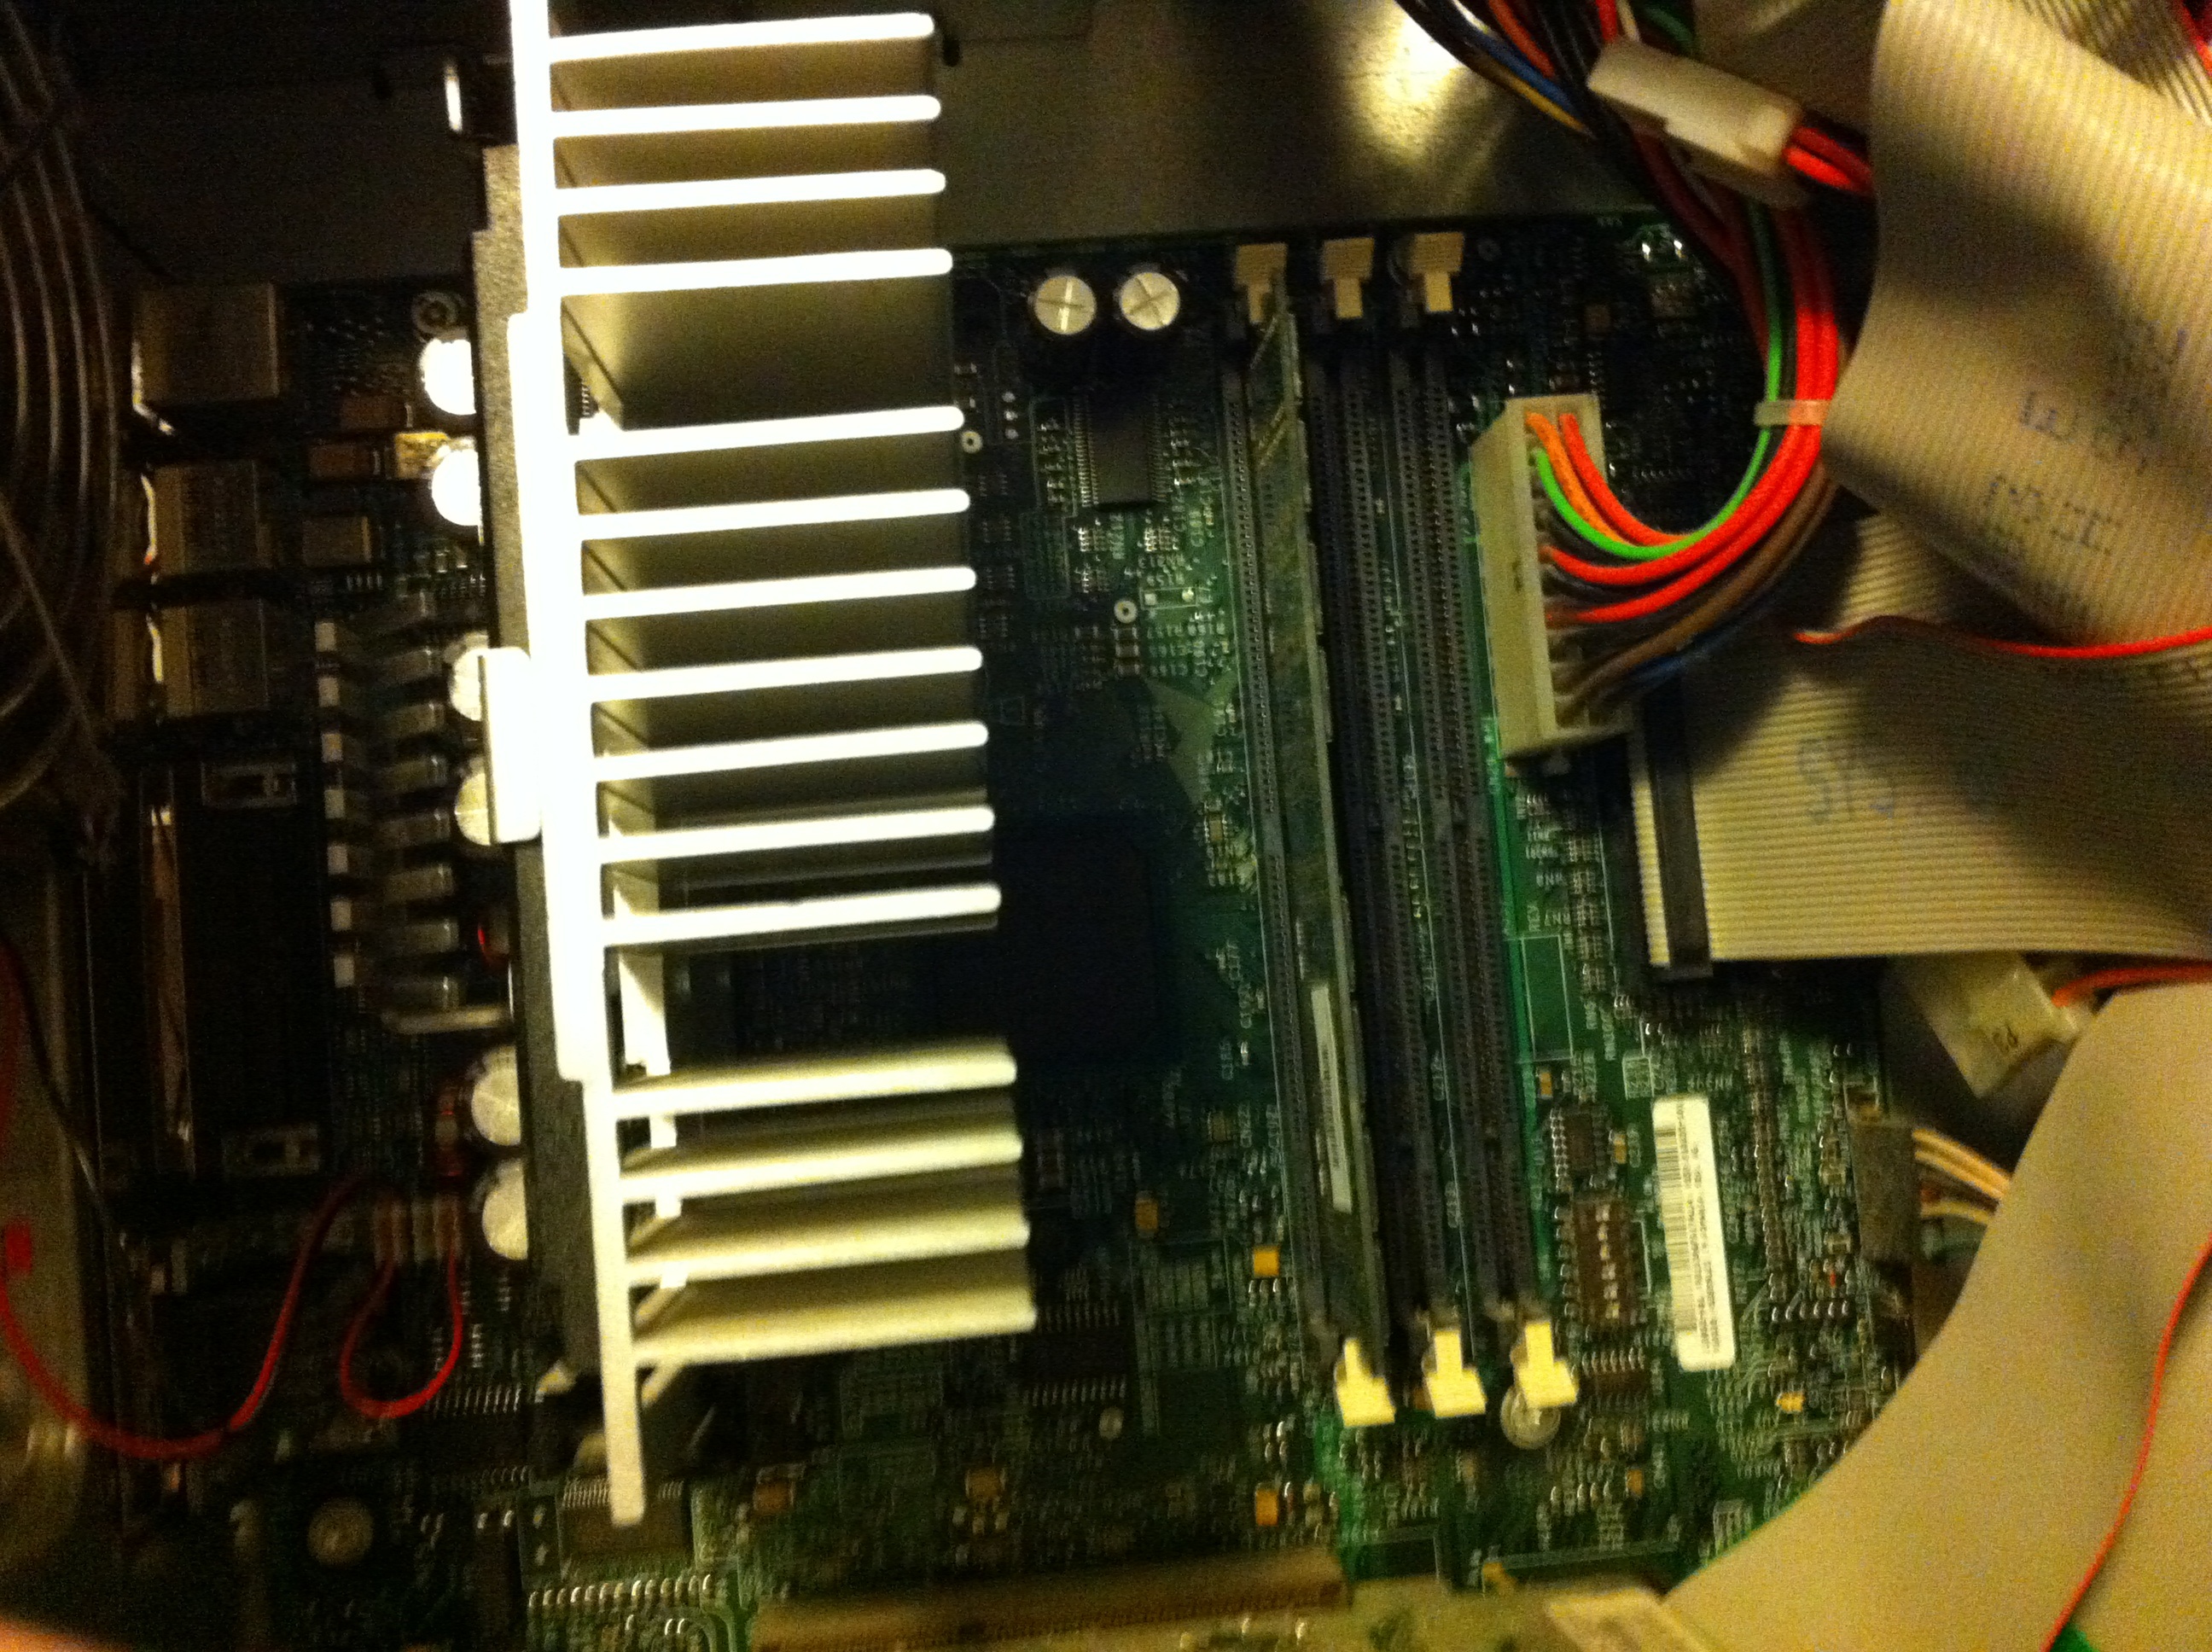 Processor and three slots for RAM, strange for how old this is.